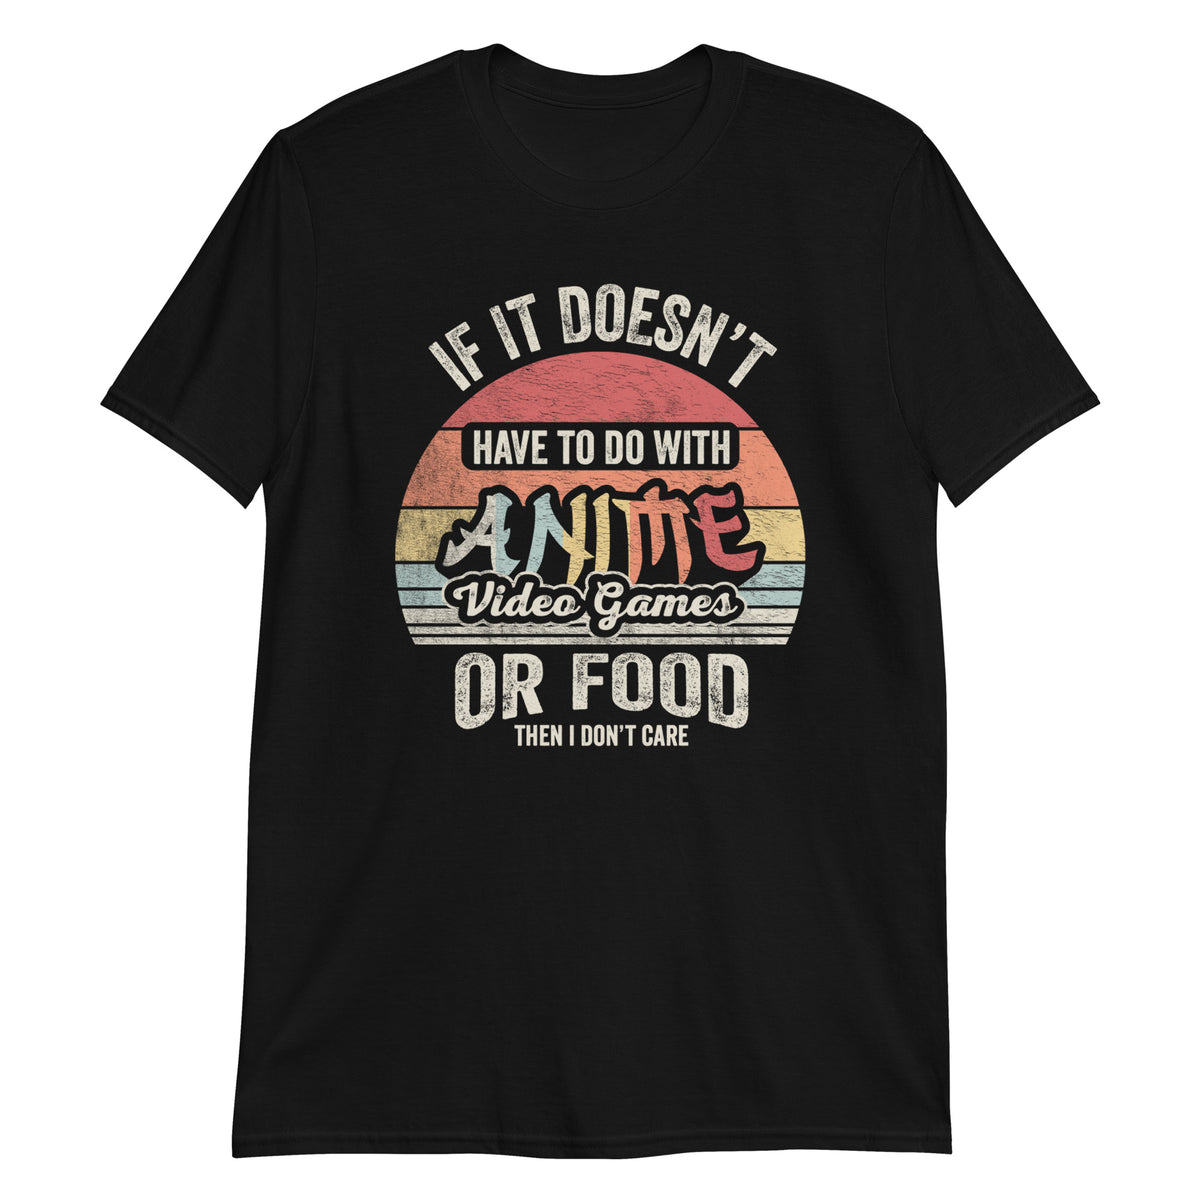 If It Doesn't Have To Do With Anime Video Games or Food Yhen I Don't Care T-Shirt